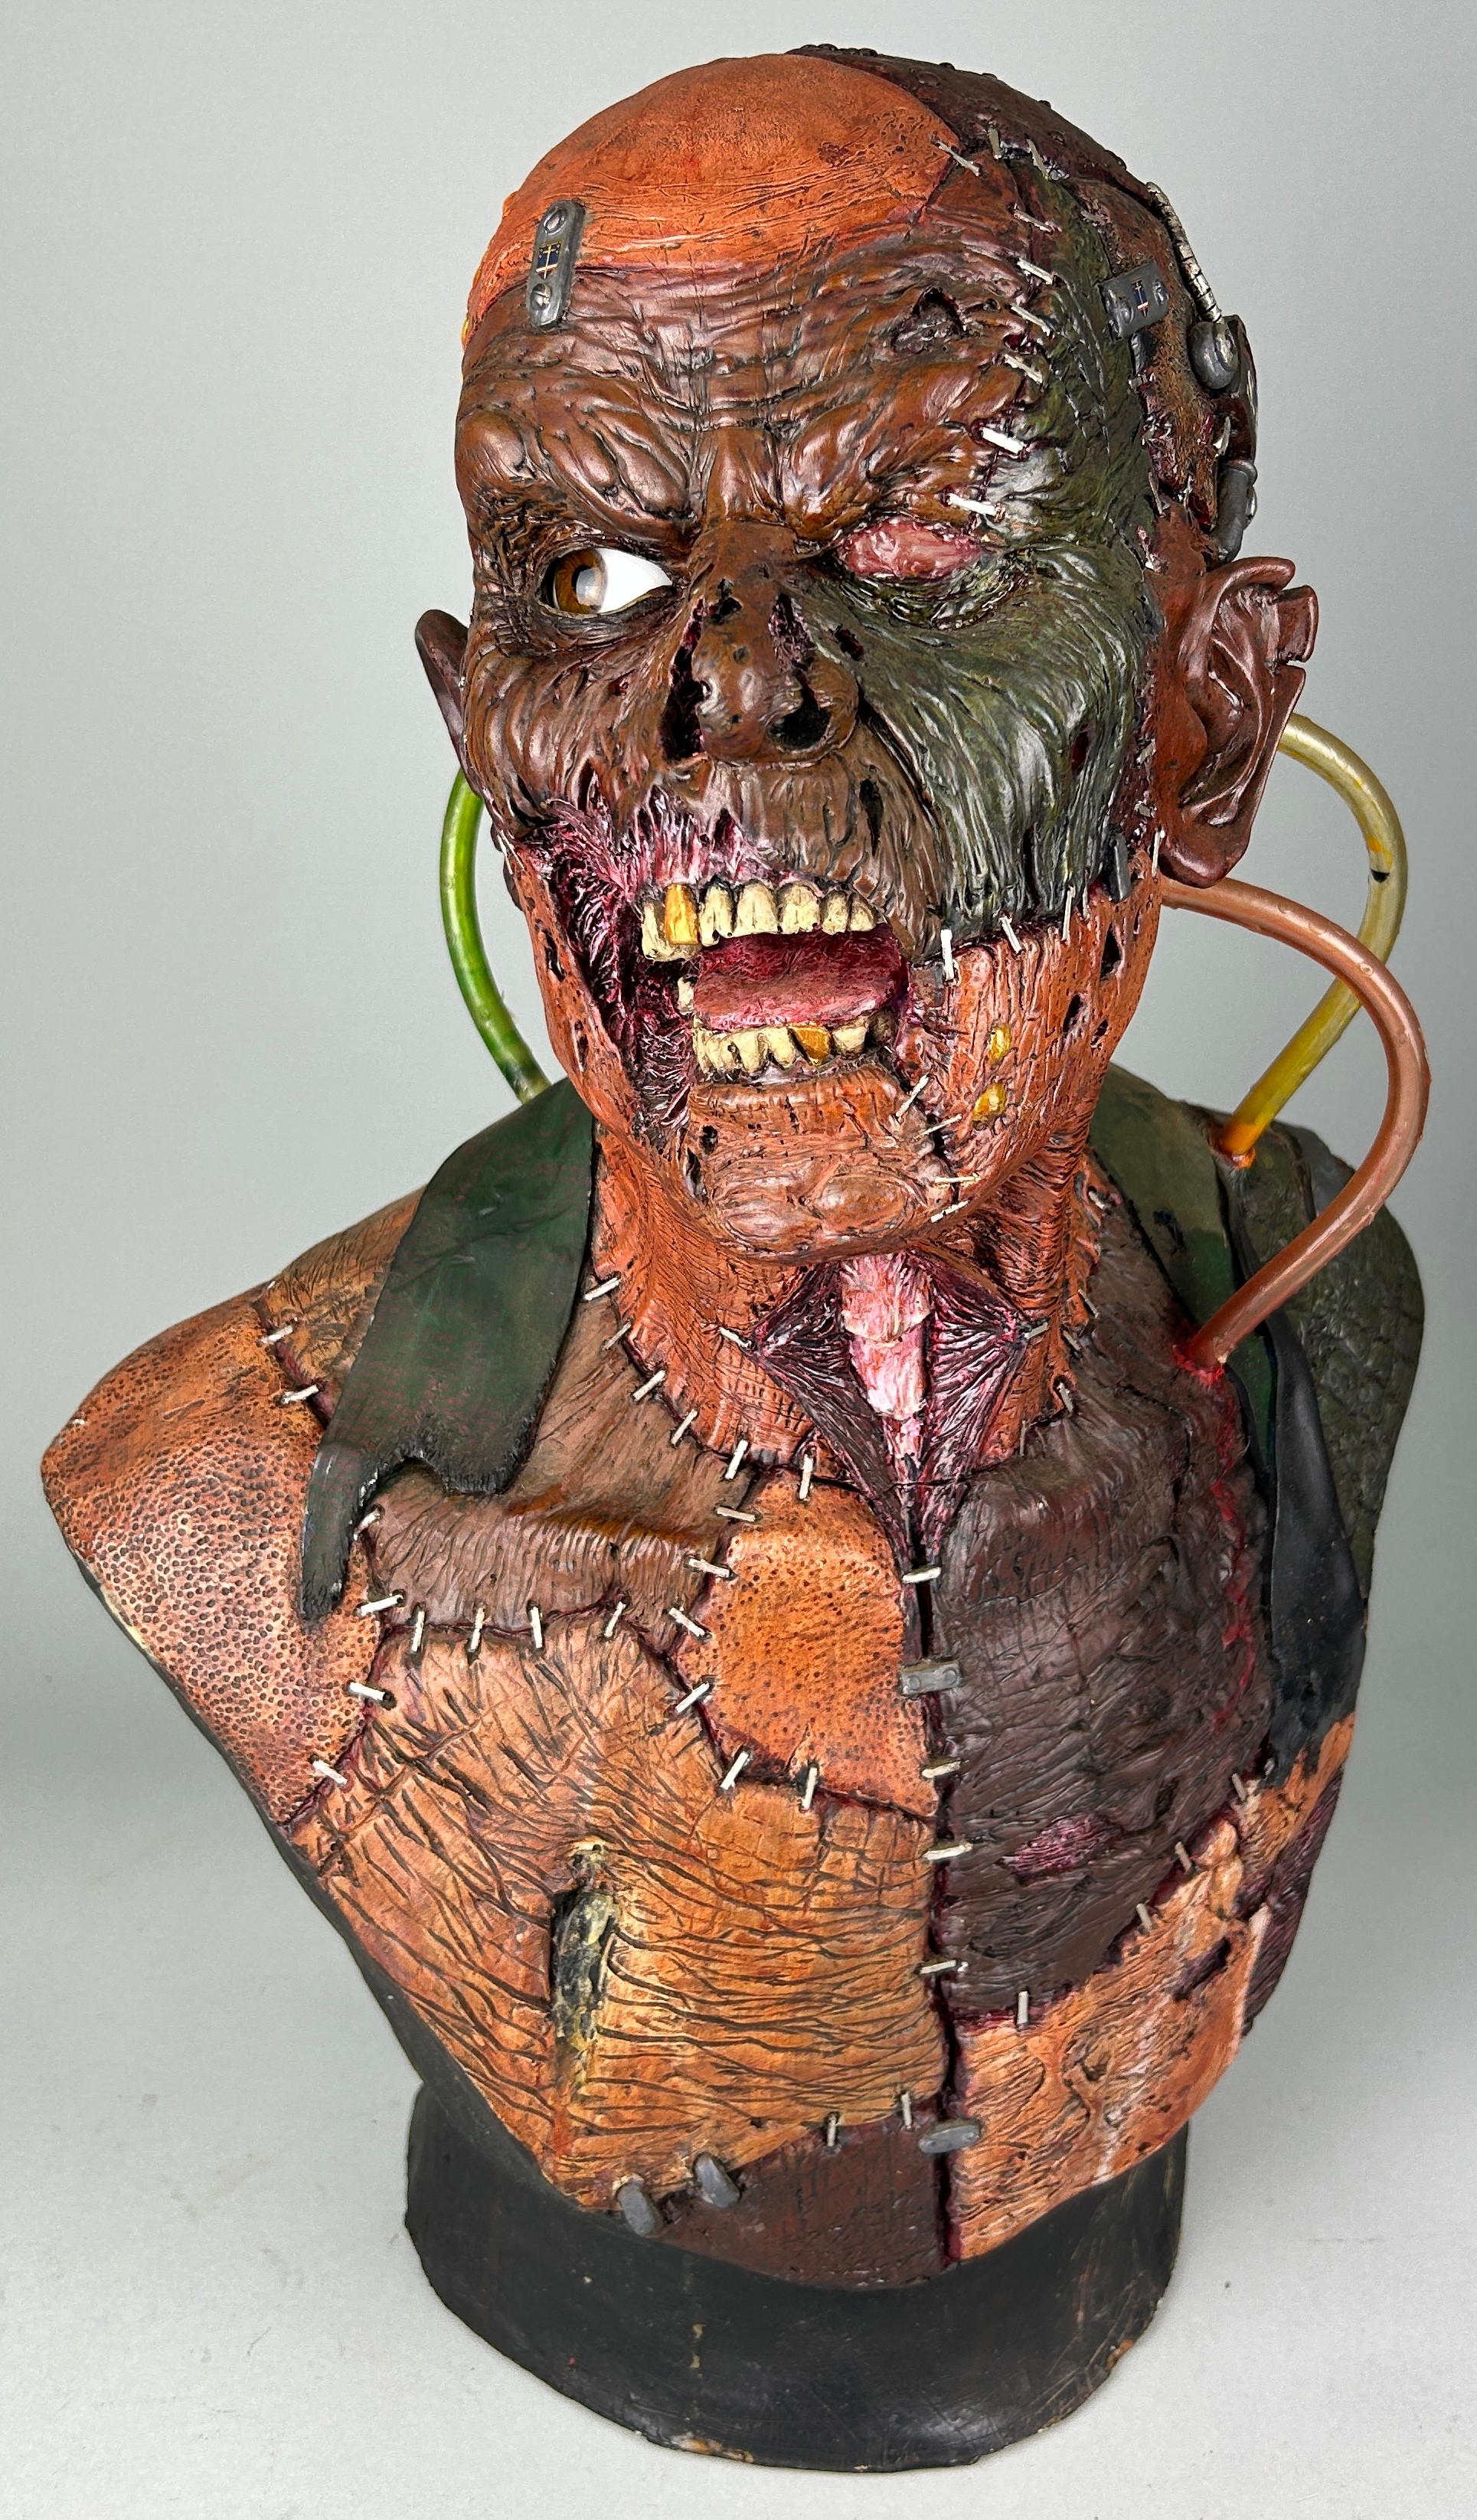 A REALISTIC HORROR MASK OF A SCI-FI ZOMBIE,